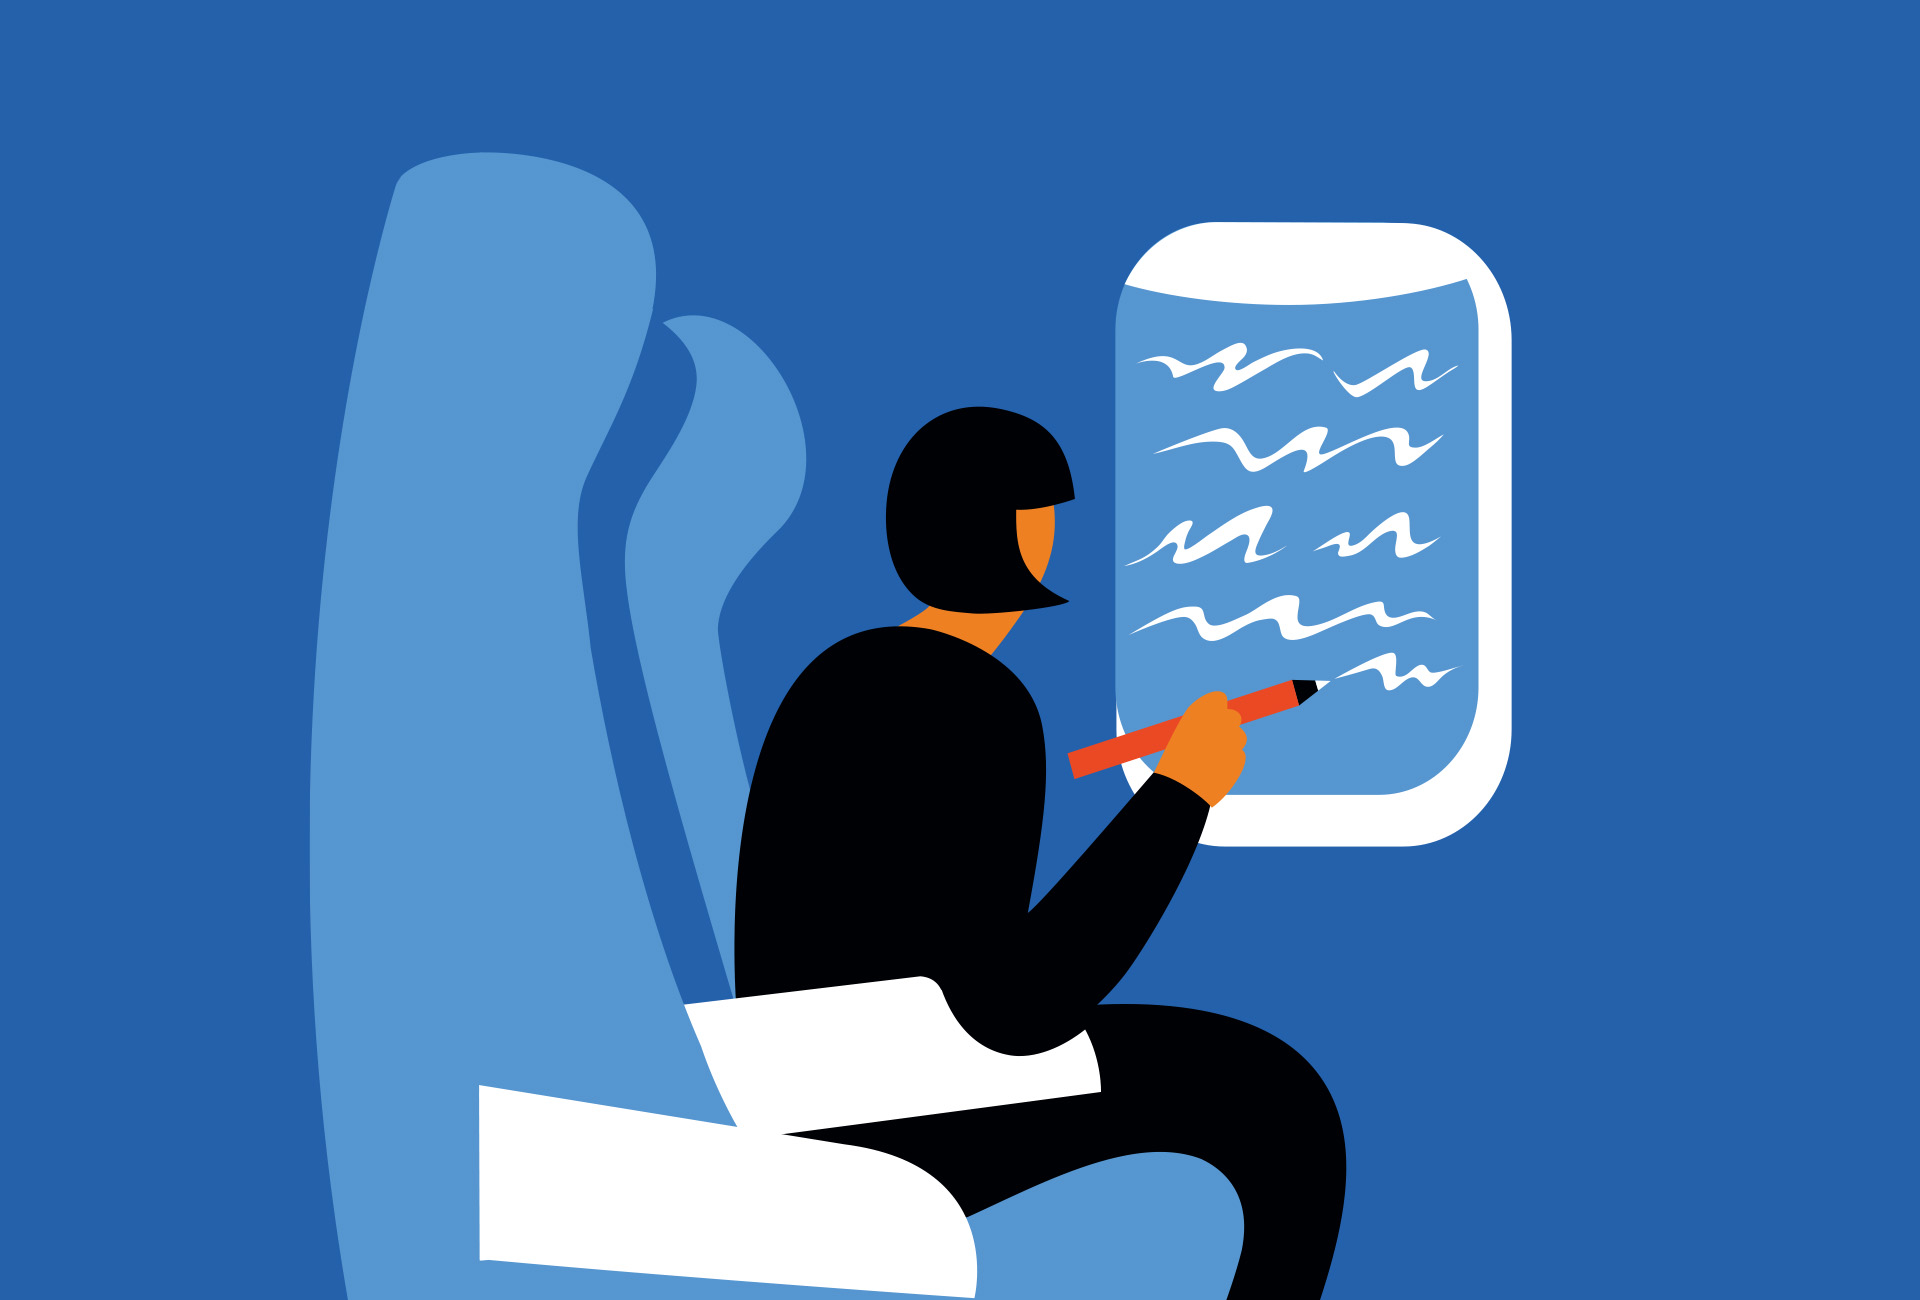 Surreal illustration in a simple style of a woman sitting in a plane seat while she writes in clouds on the window with her pencil.